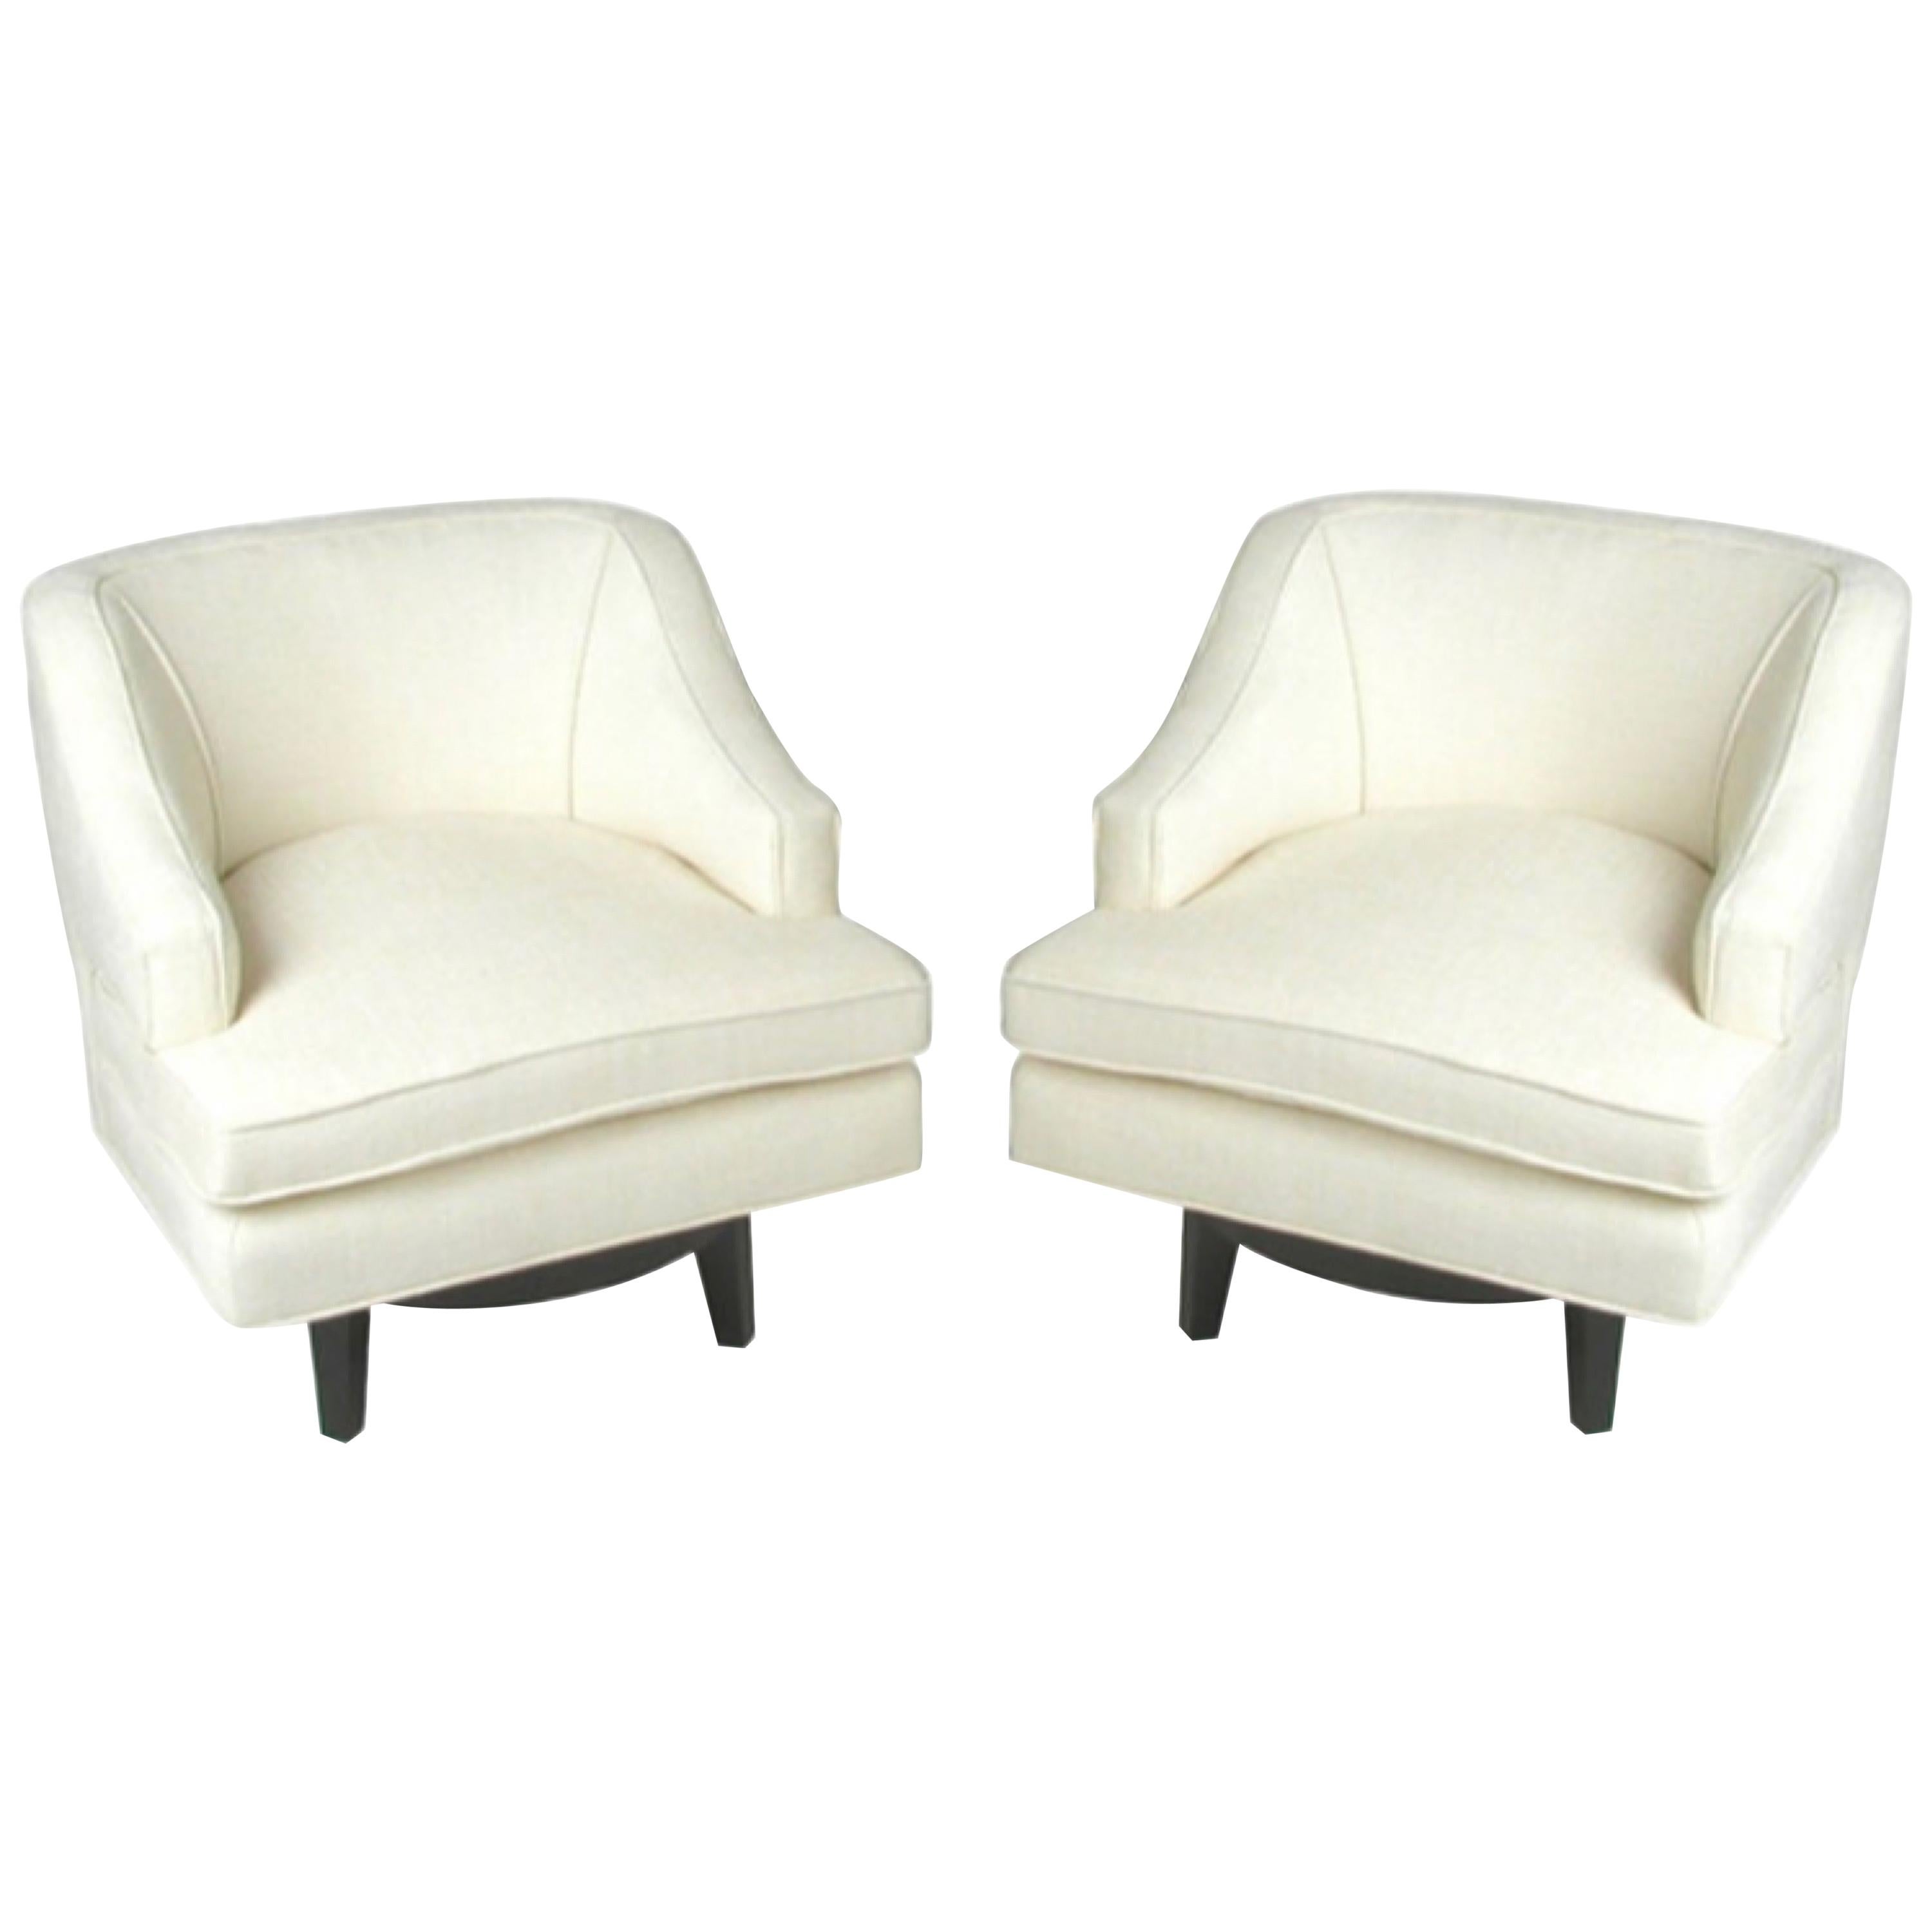 Pair of Tommi Parzinger Swivel Chairs for Charak Modern